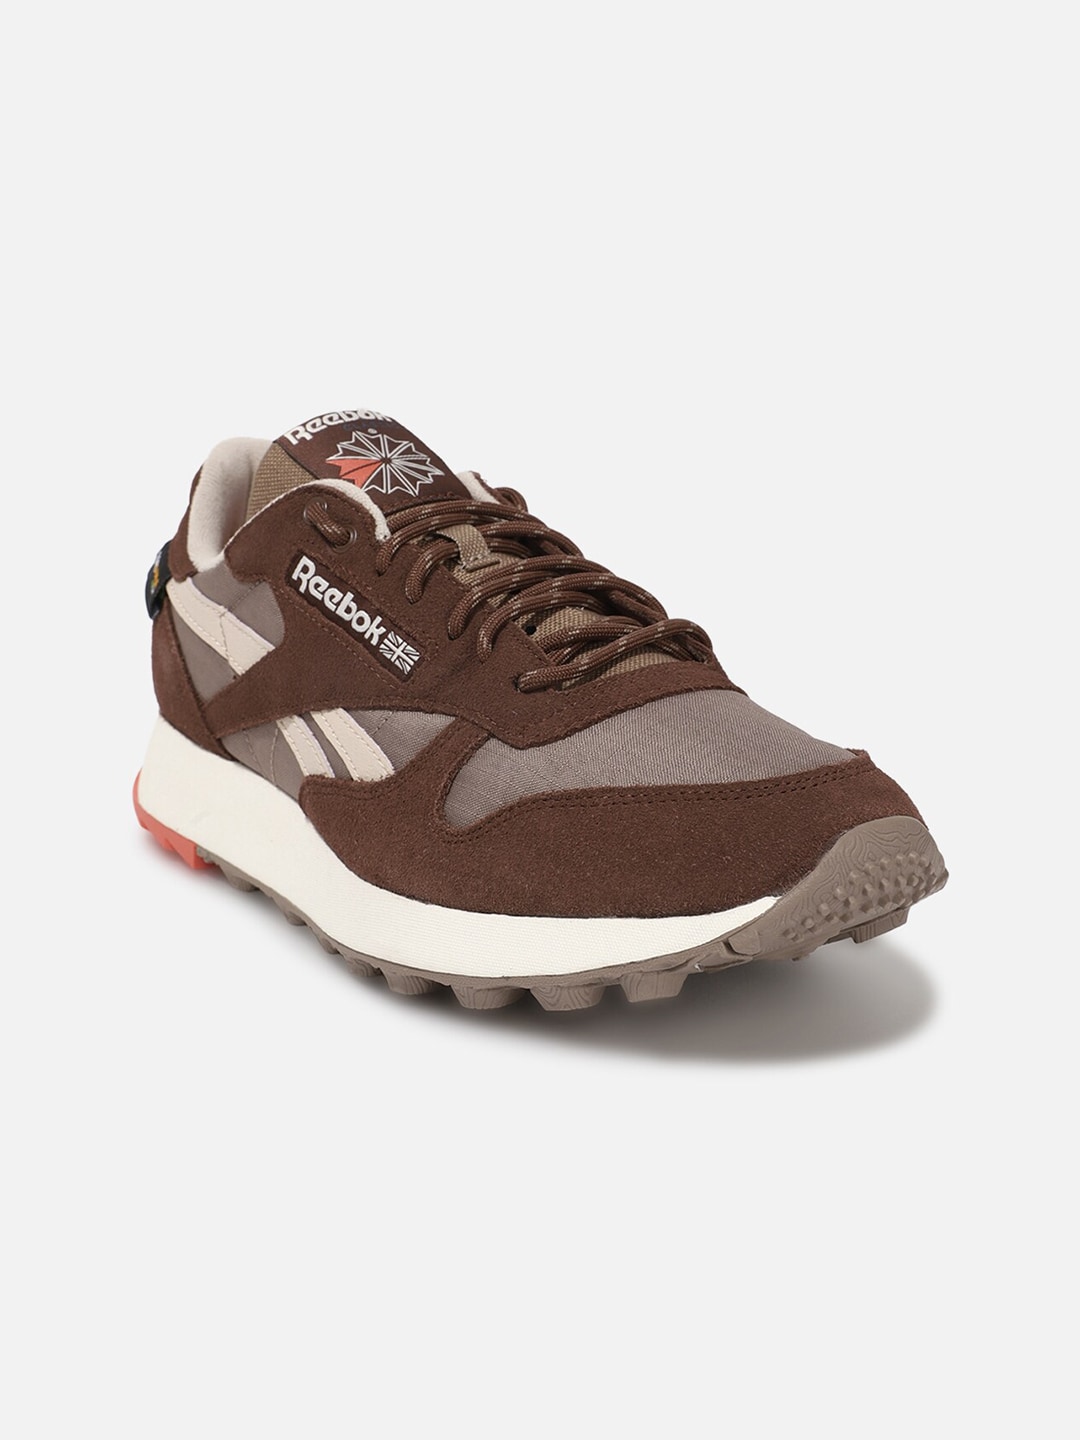 Reebok Classic Leather Running Shoes Price in India